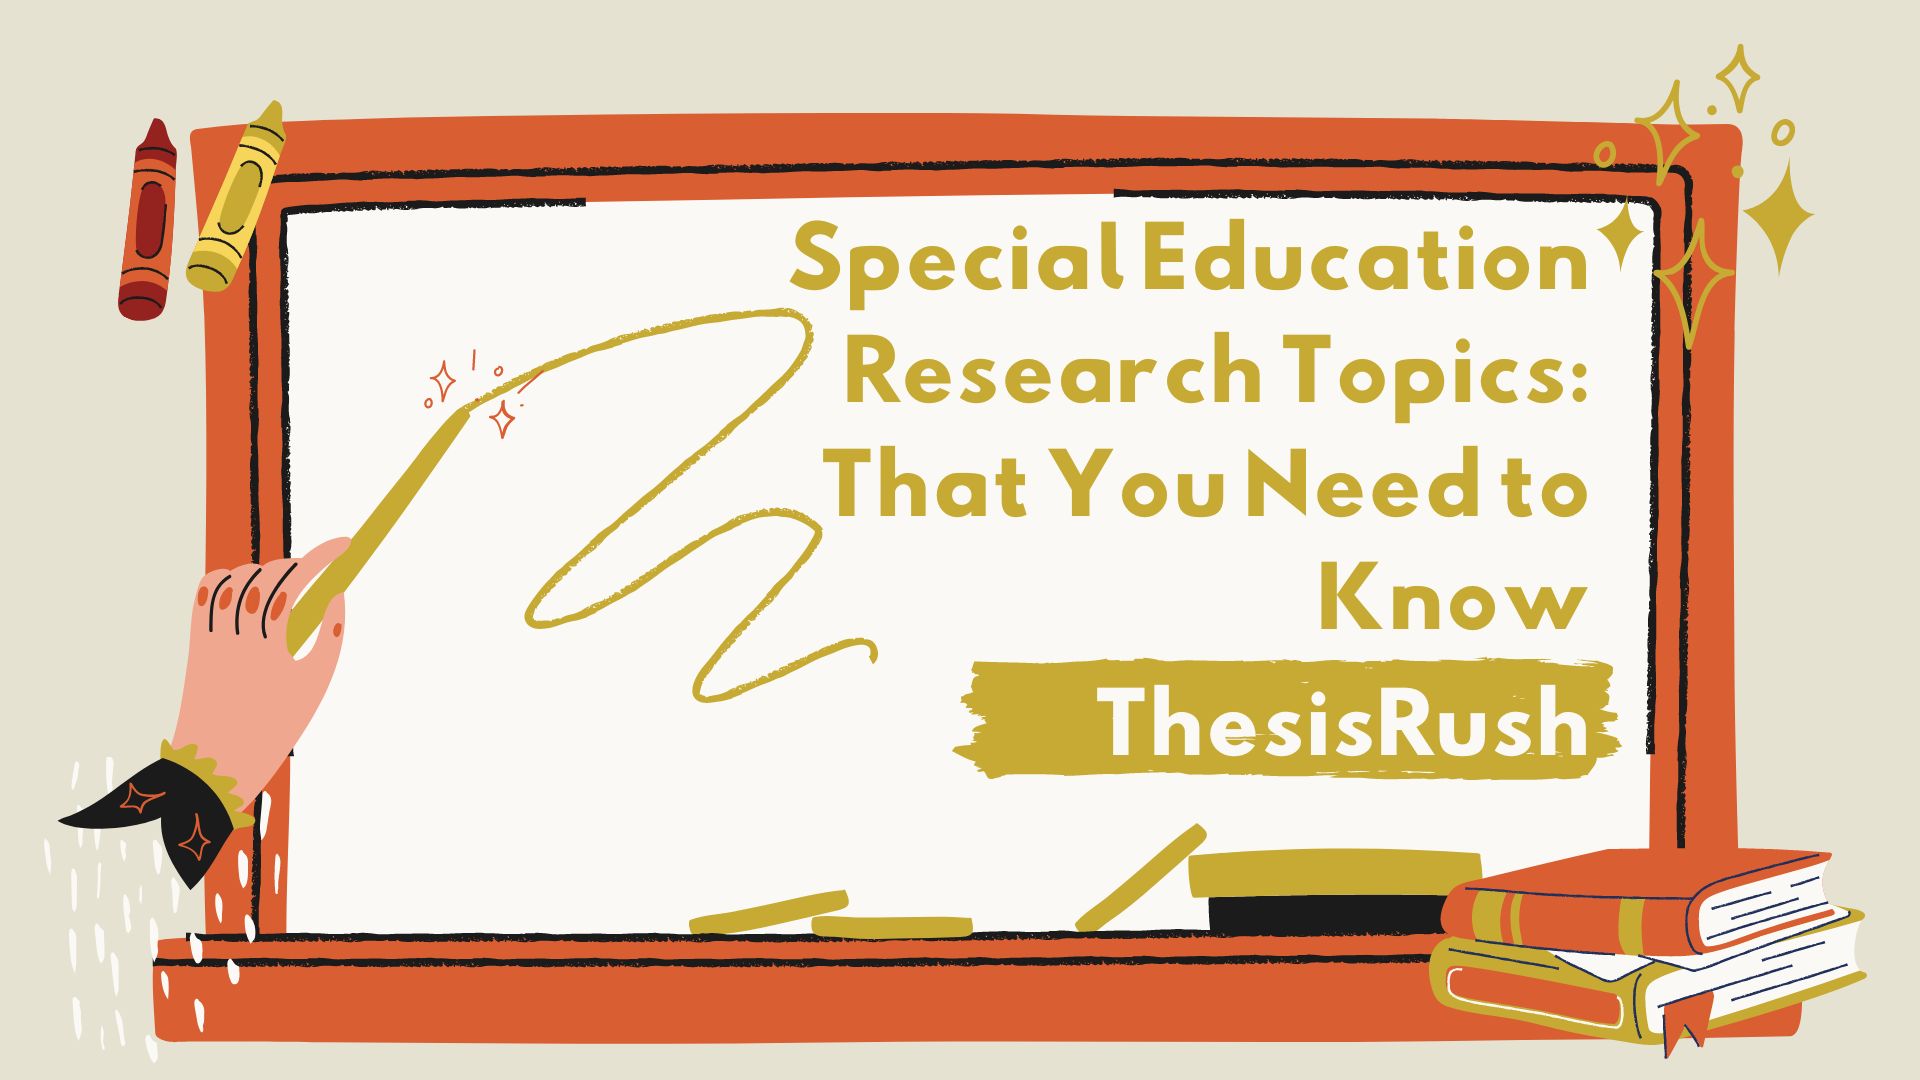 Special Education Research Topics: That You Need to Know